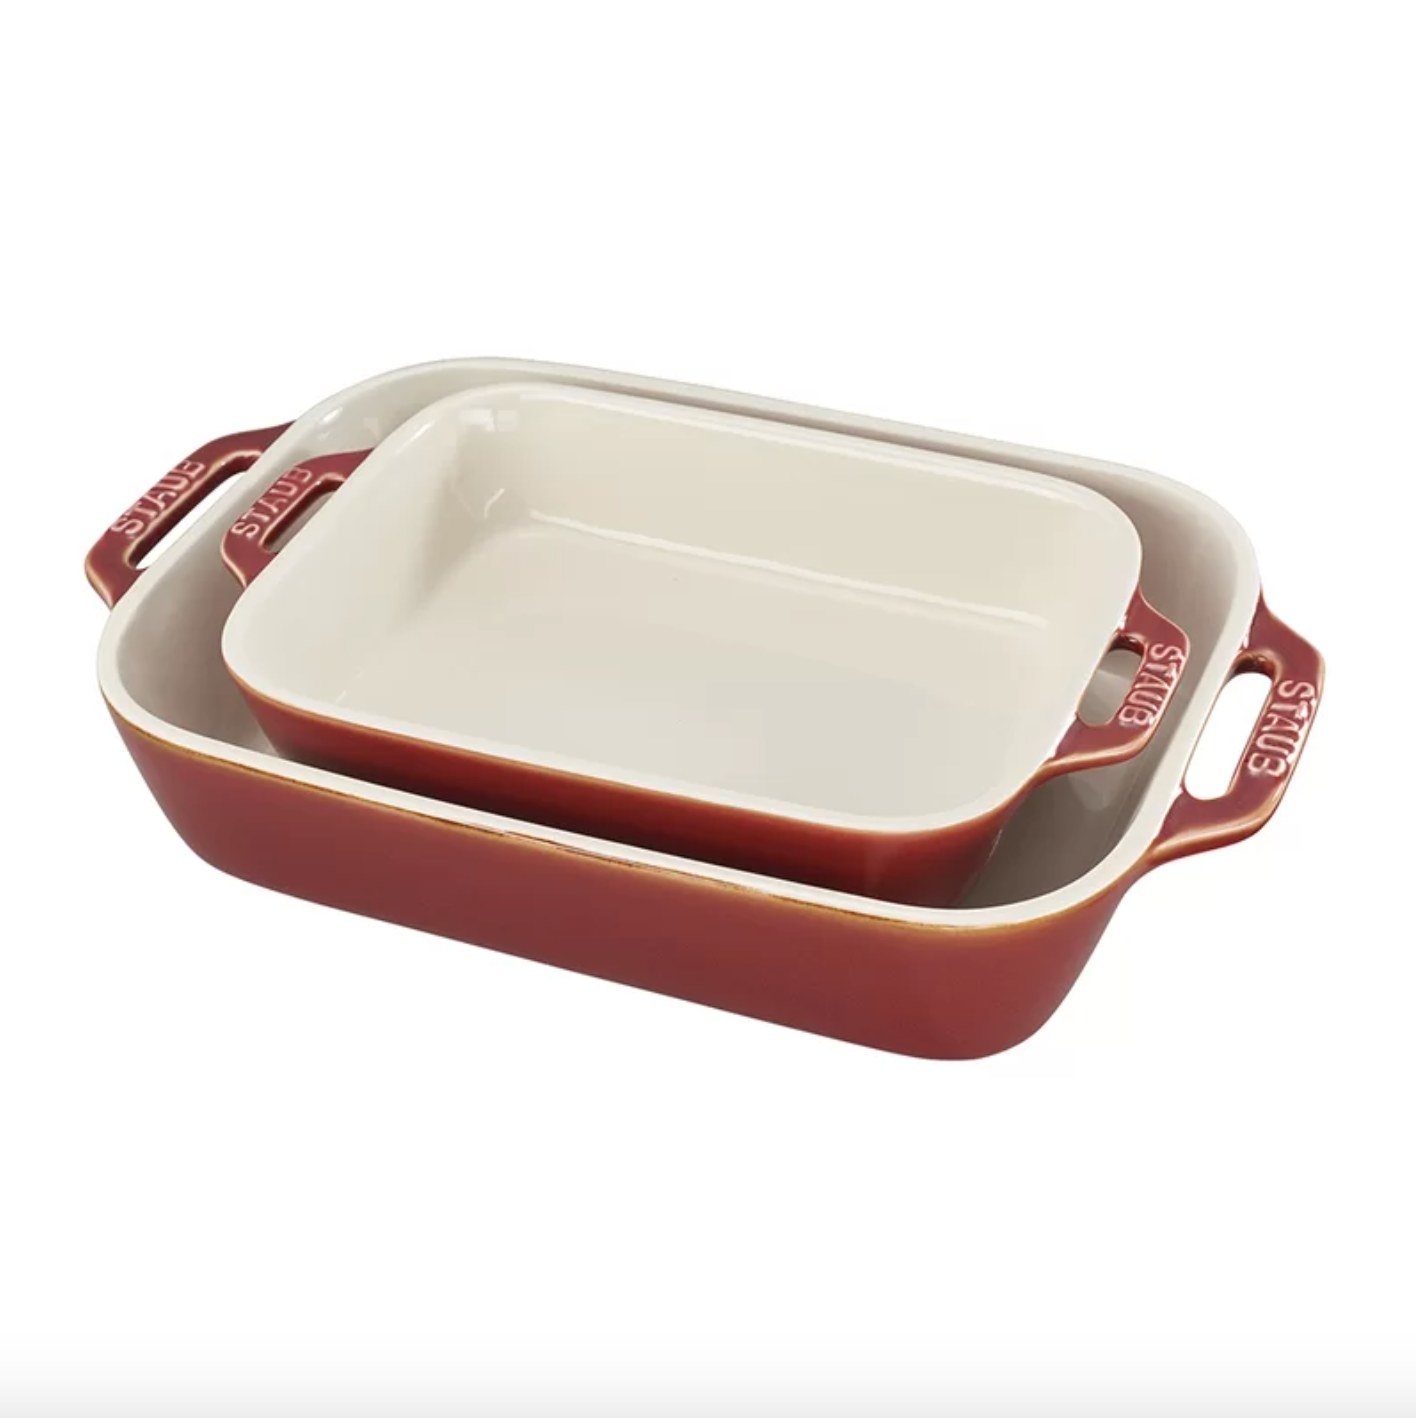 The two-piece stoneware baking set in rustic red